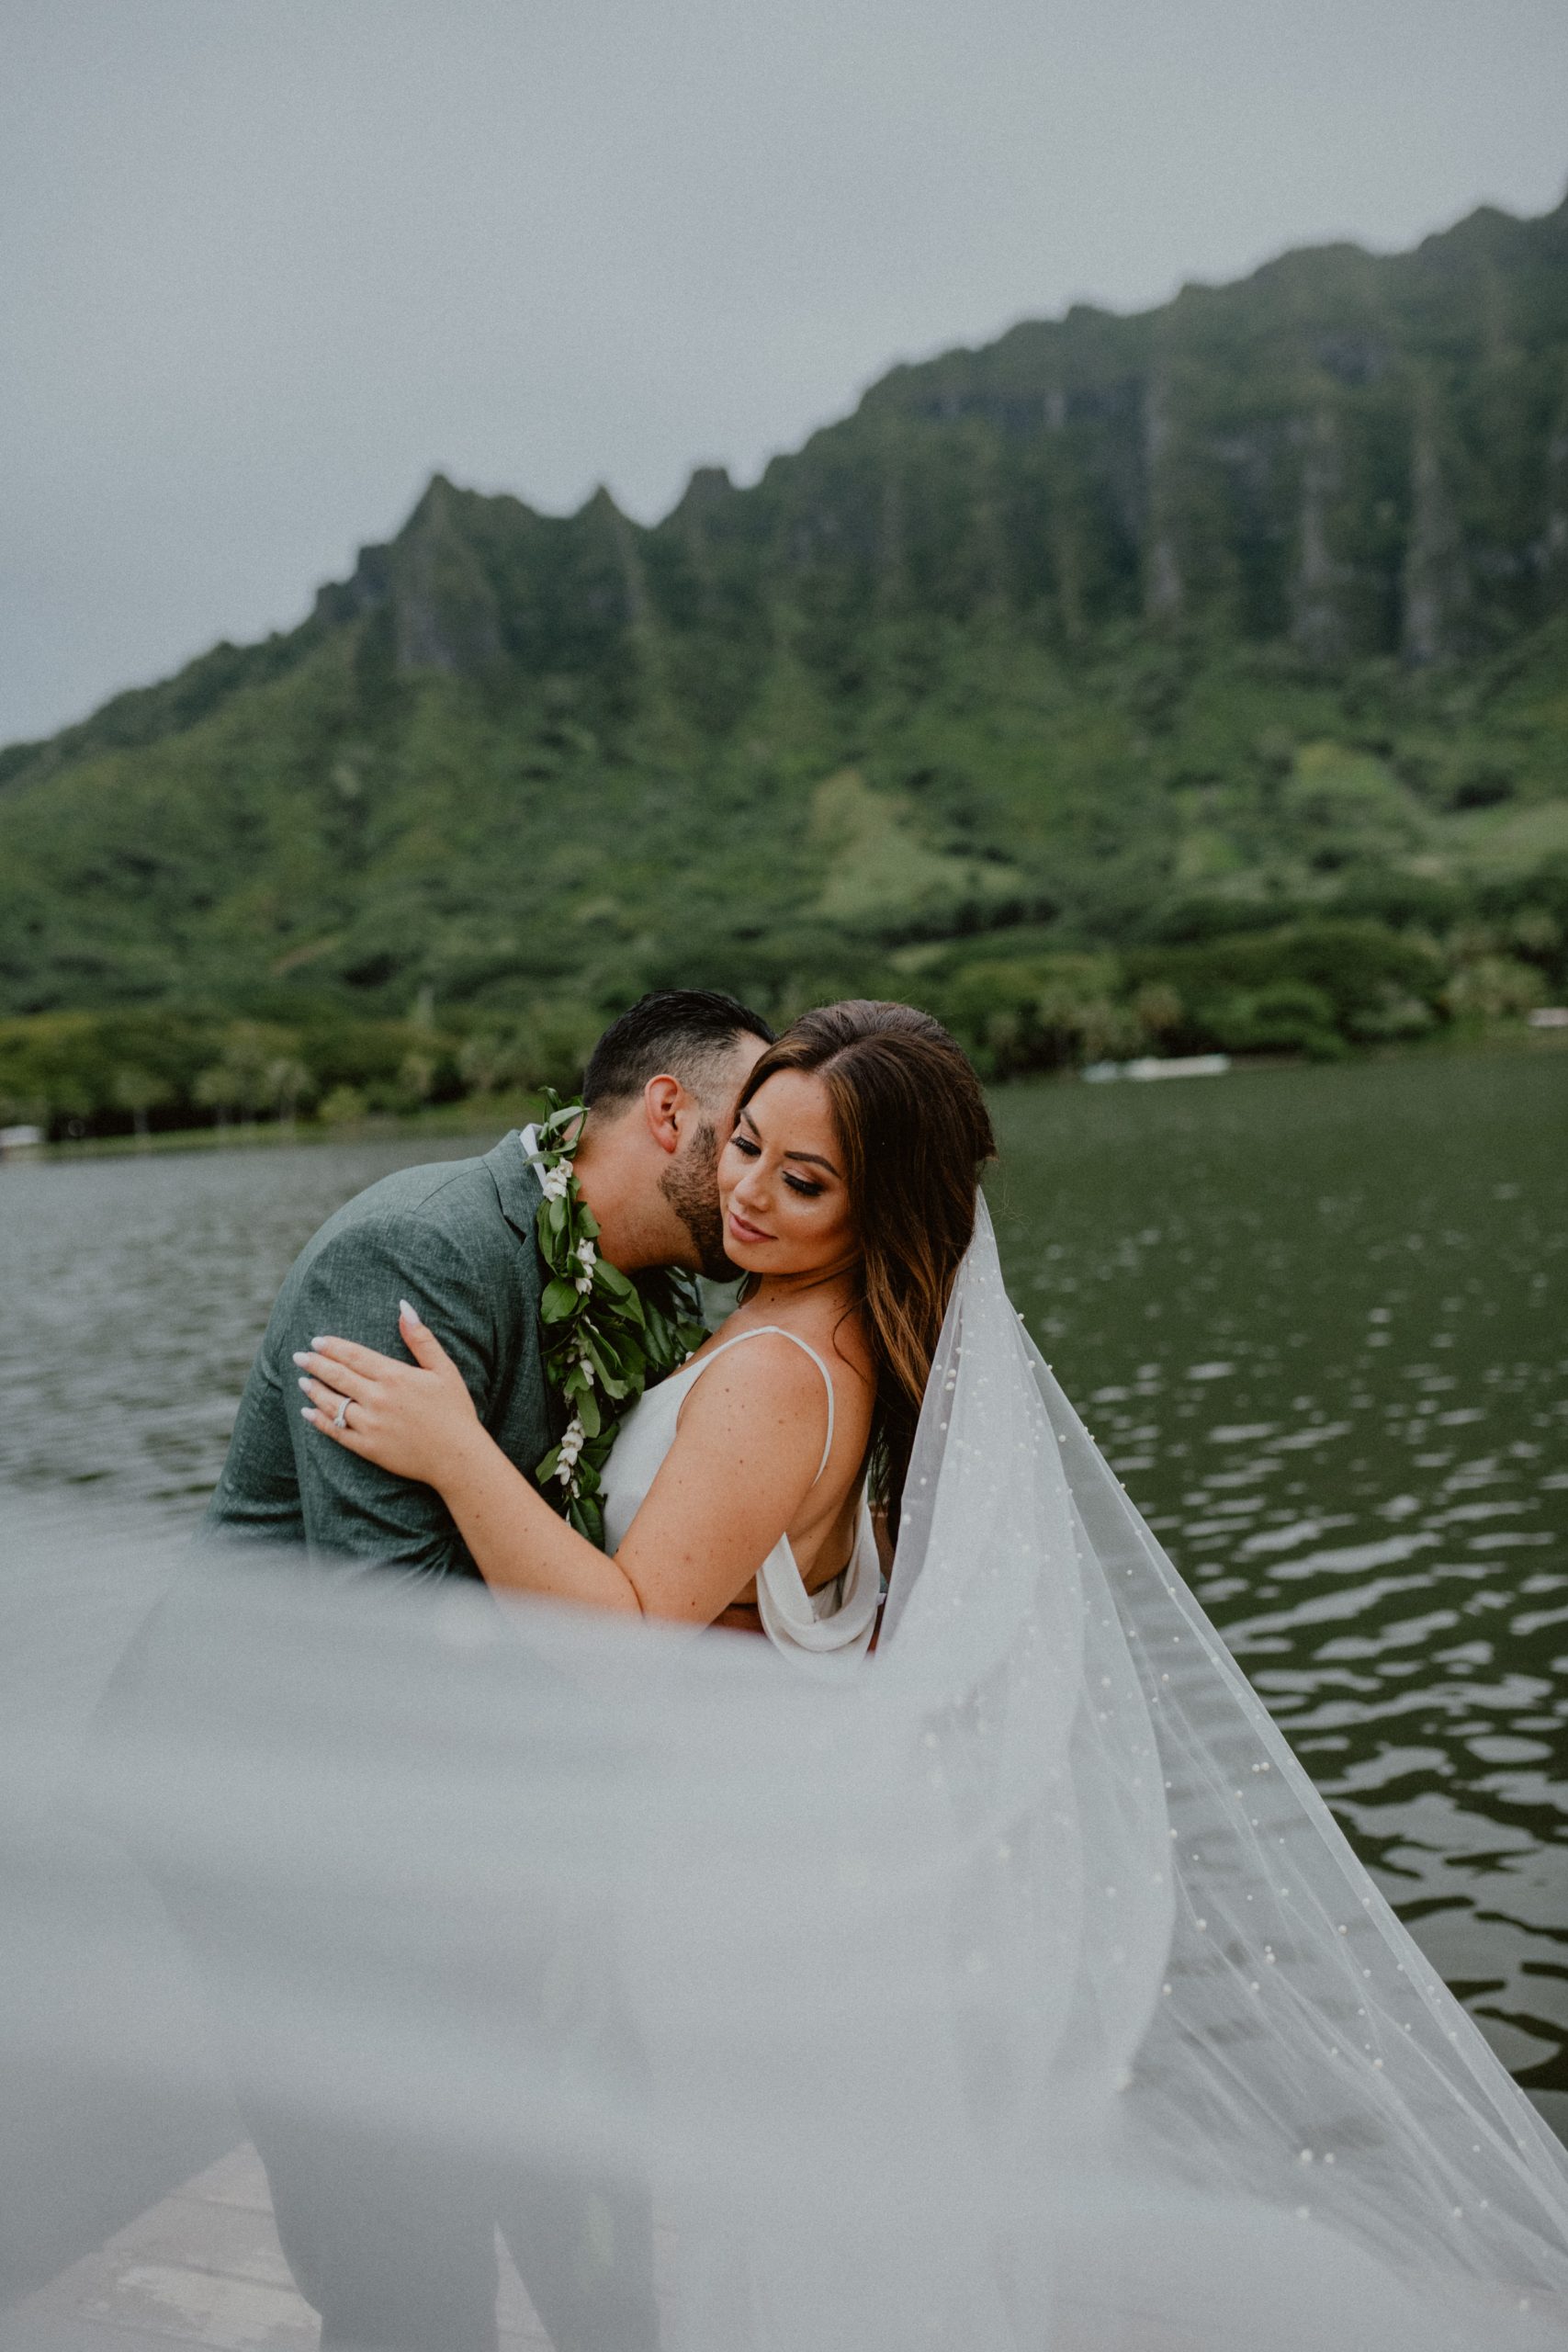 Bride and groom pose together after their wedding day on Kualoa Ranch while standing in front of the water on the beach in Oahu | Oahu Wedding Photographer, Oahu Elopement Photographer, Destination Wedding Photographer, Destination Elopement Photographer, Newlywed moments ideas, Newlywed Photography inspiration, Hawaii Elopement ideas | chelseaabril.com